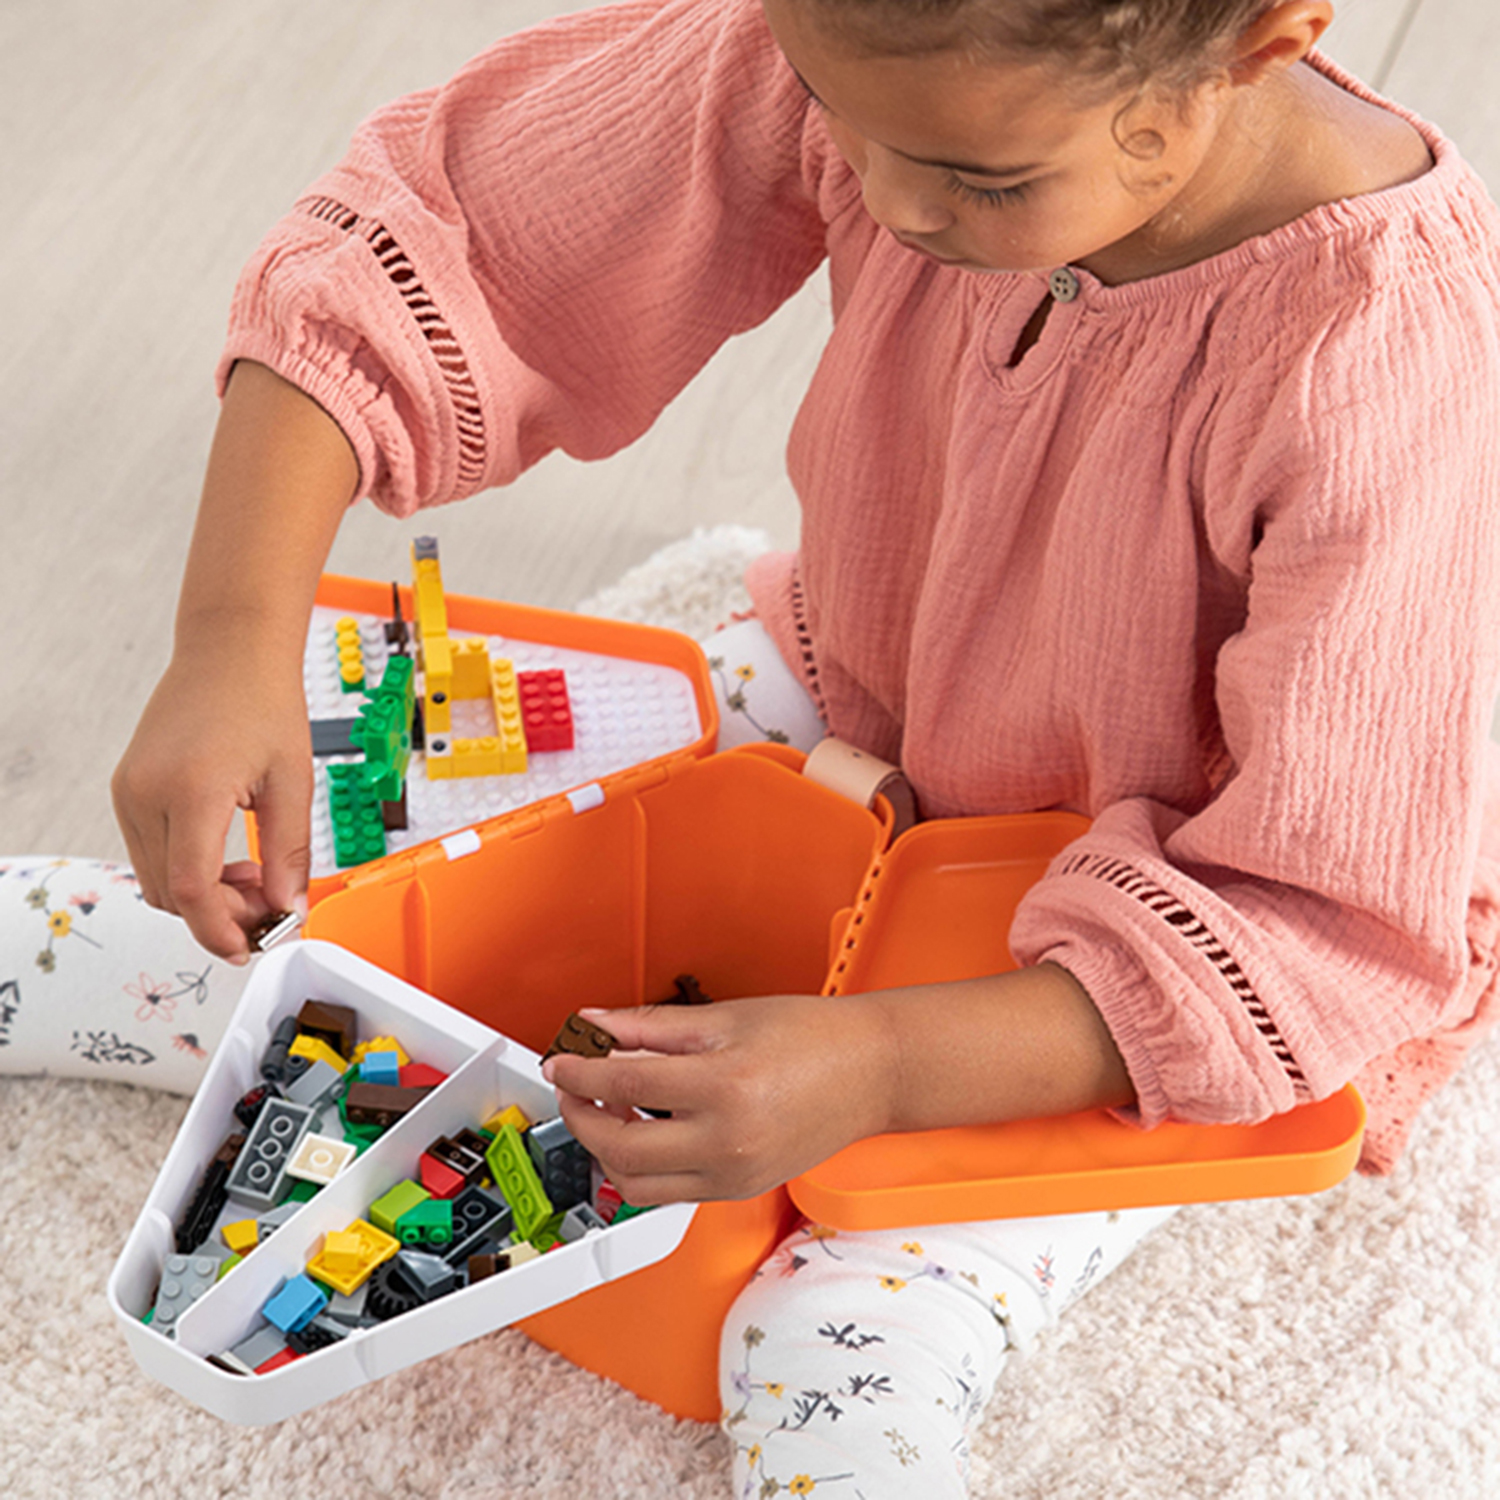 Best for Lego Storage on the Go: Teebee Play and Store Toy Box 